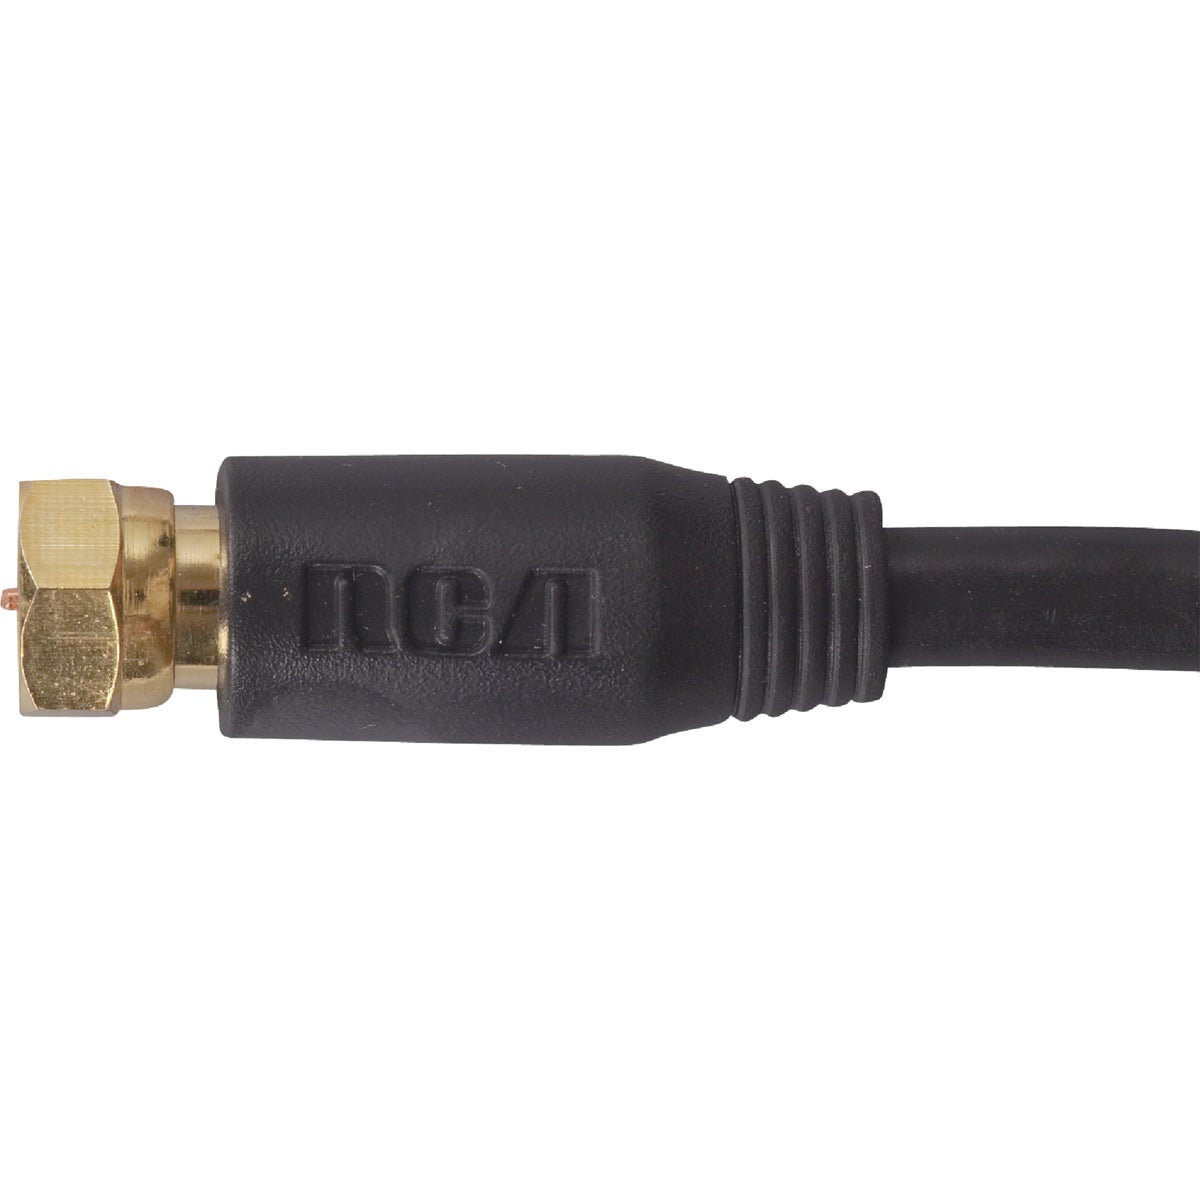 Item 500229, Black 100-foot digital RG6 coaxial cable with F-connector is a quality 